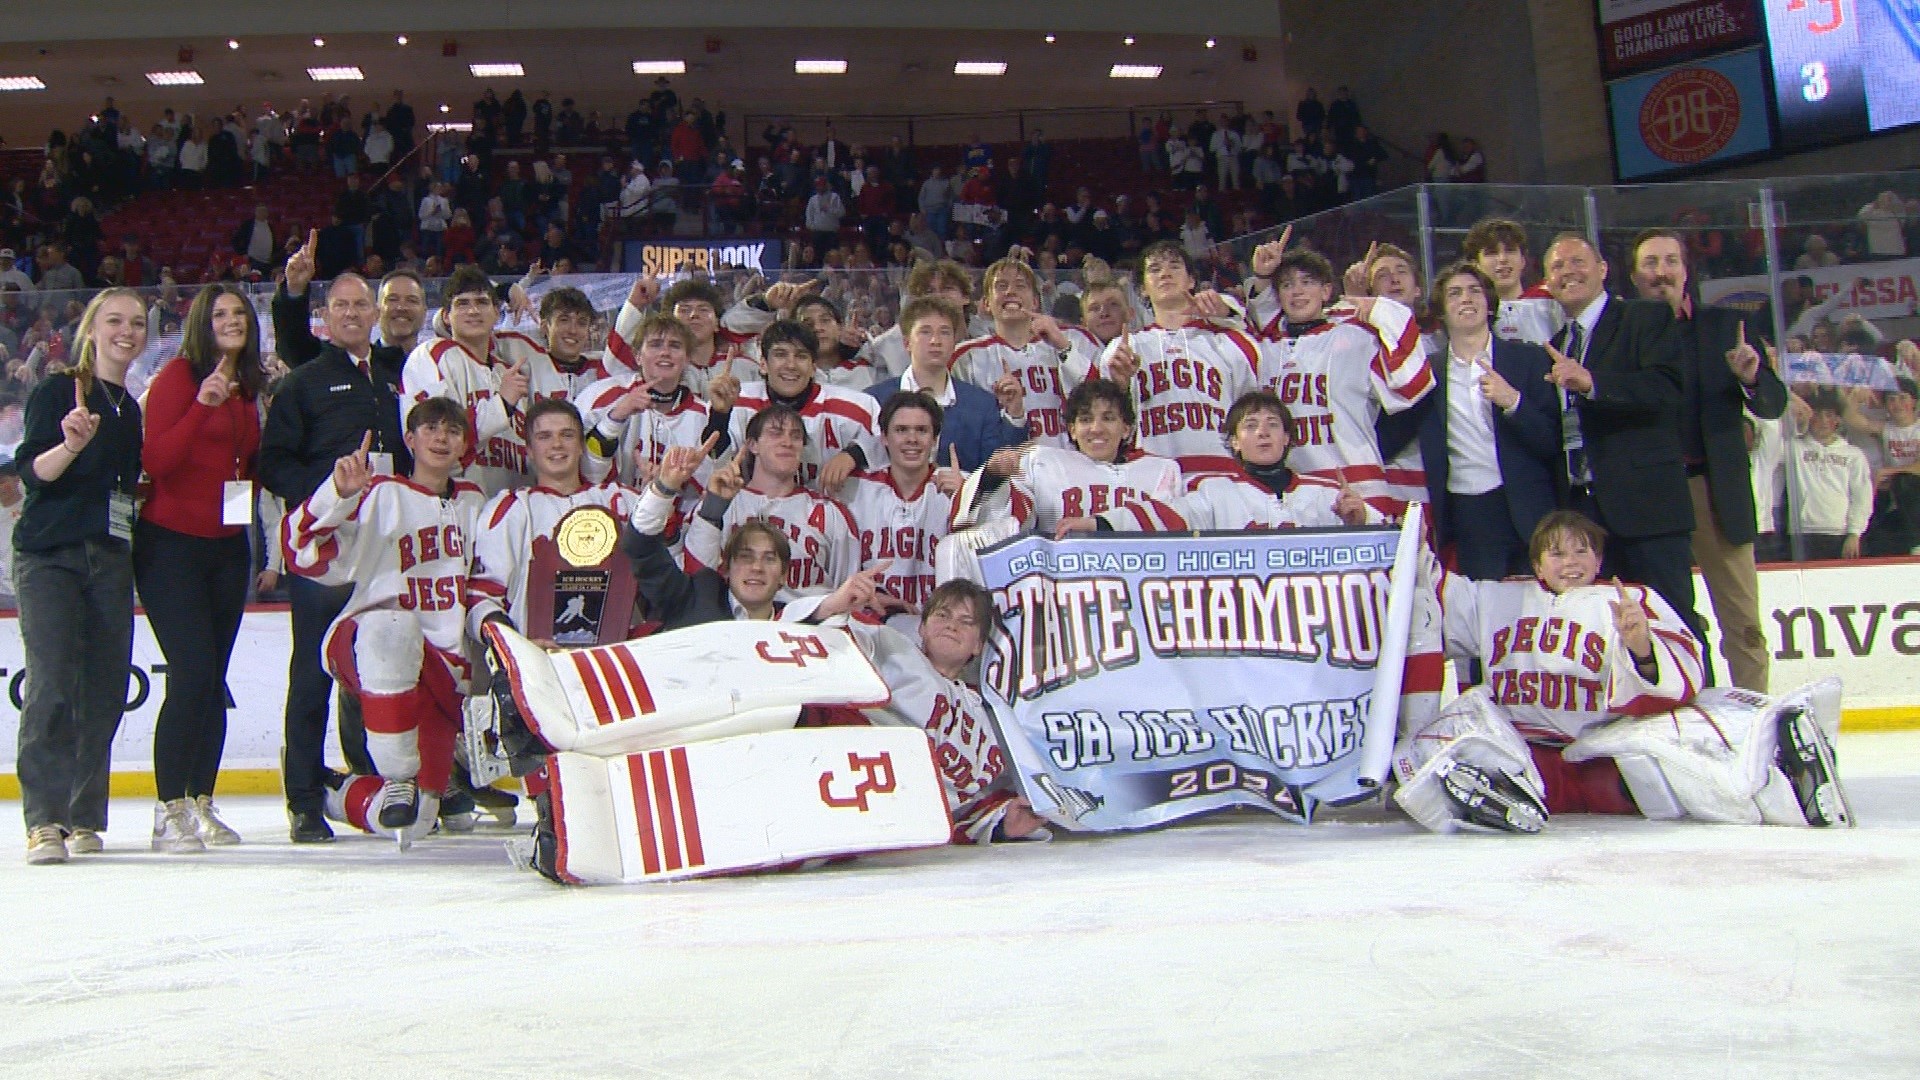 The Raiders defeated the defending champion Eagles 3-1 to capture the Class 5A state title at Magness Arena.